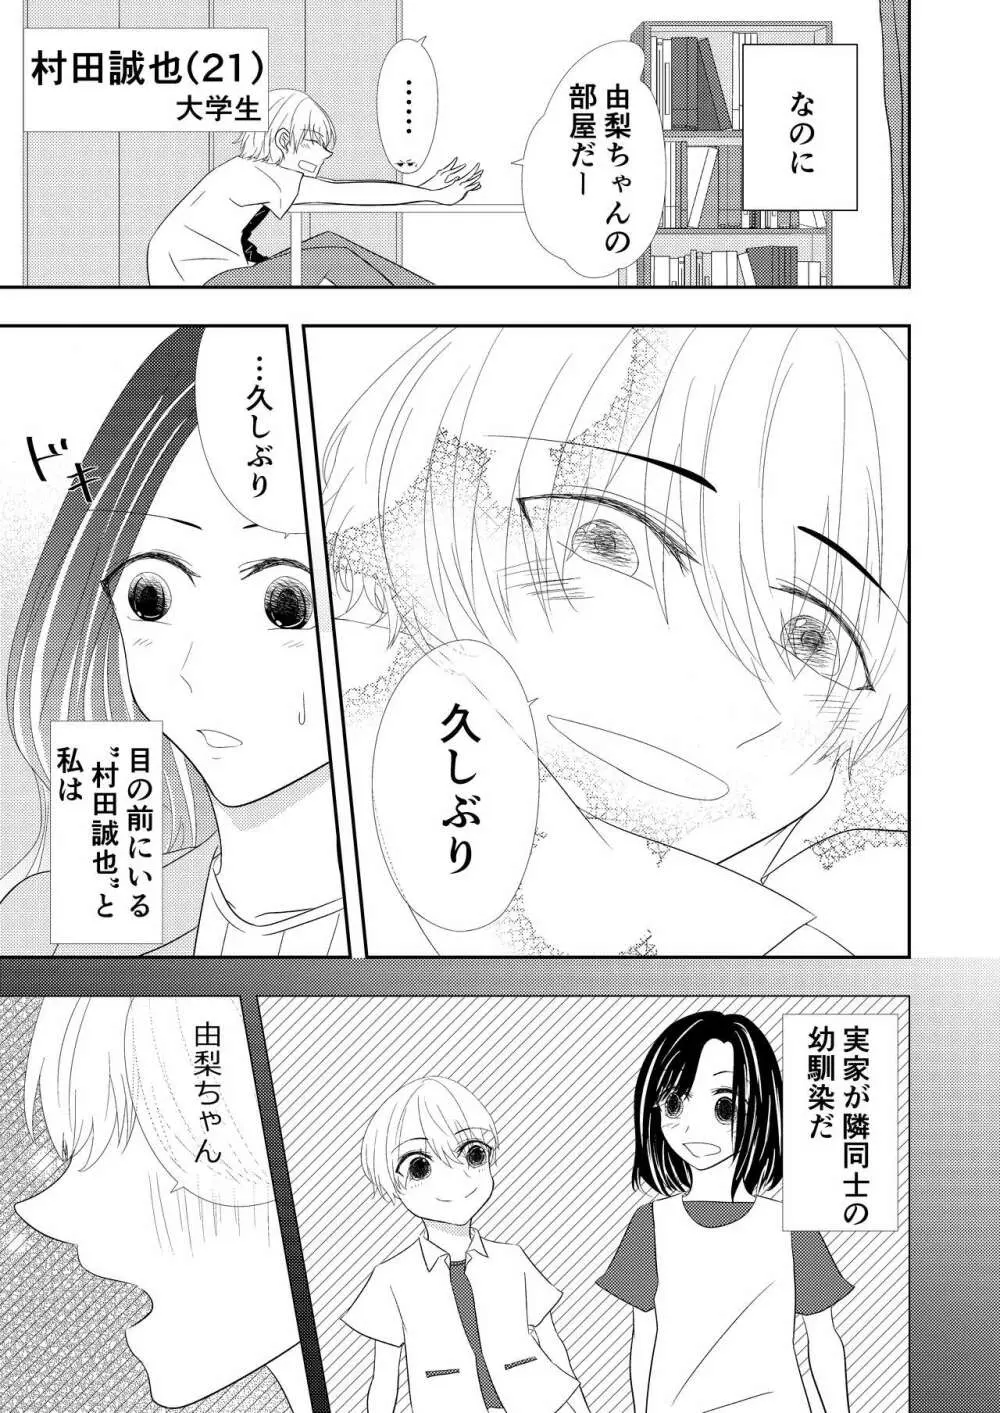 【TL】年下の幼馴染にプロポーズされました！？ - page5